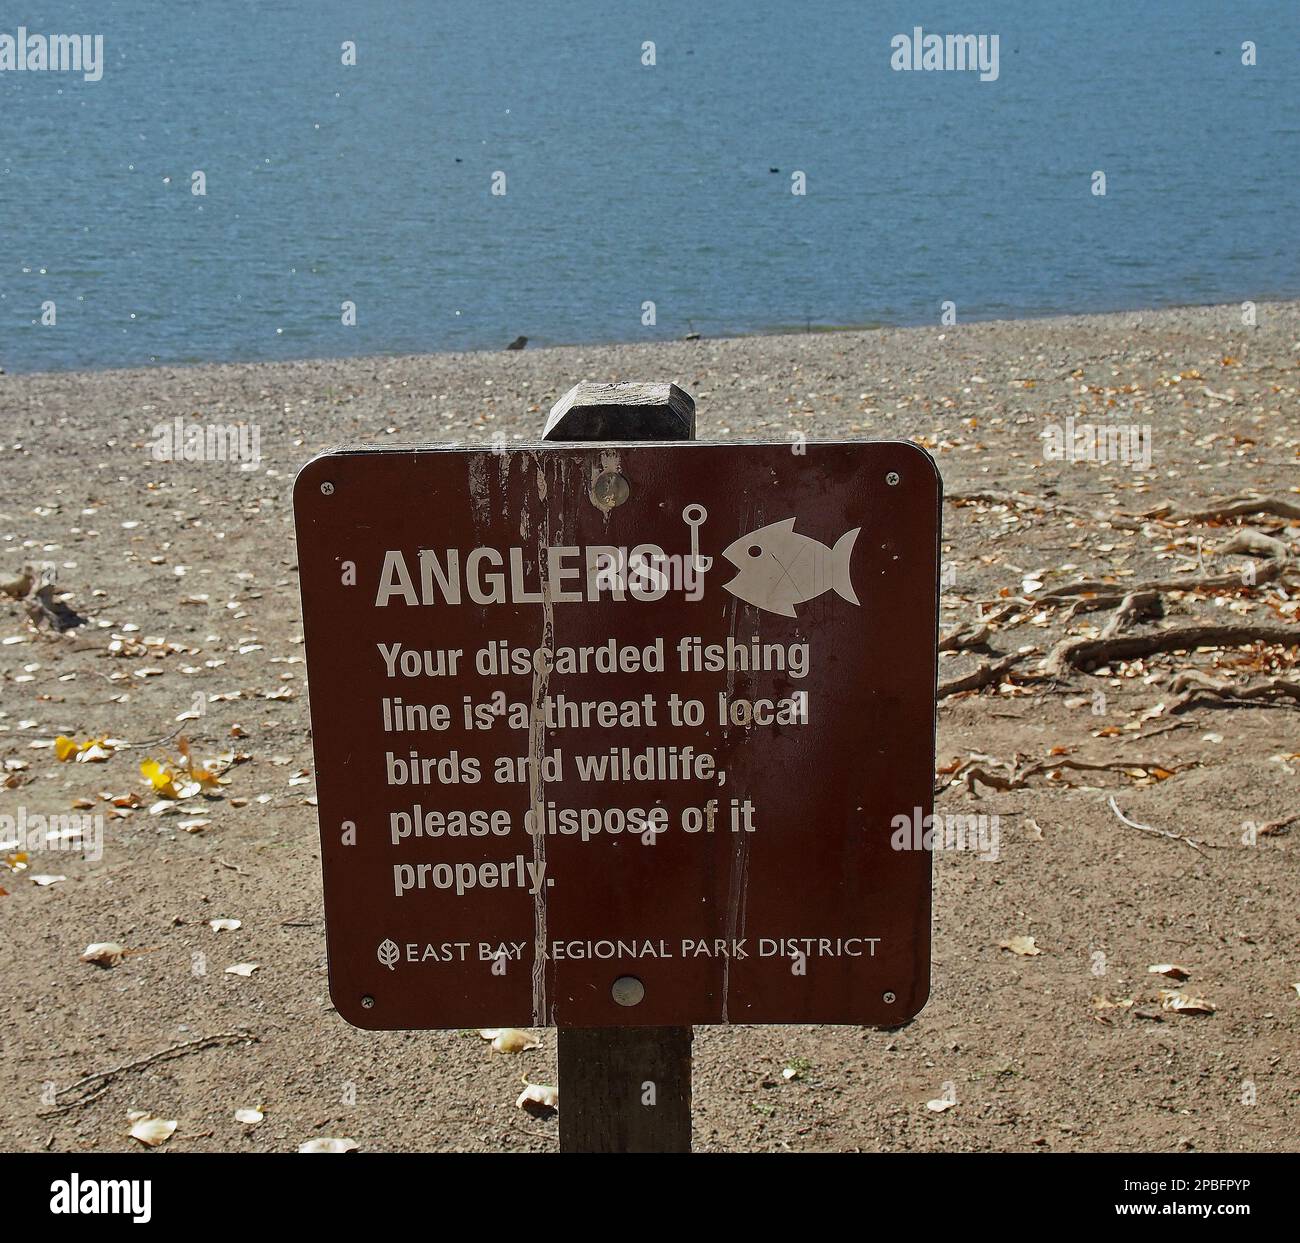 Anglers your discarded fishing line is a threat to local birds and wildlife, please dispose of it properly sign on beach at Lake Del Valle, Livermore, California Stock Photo